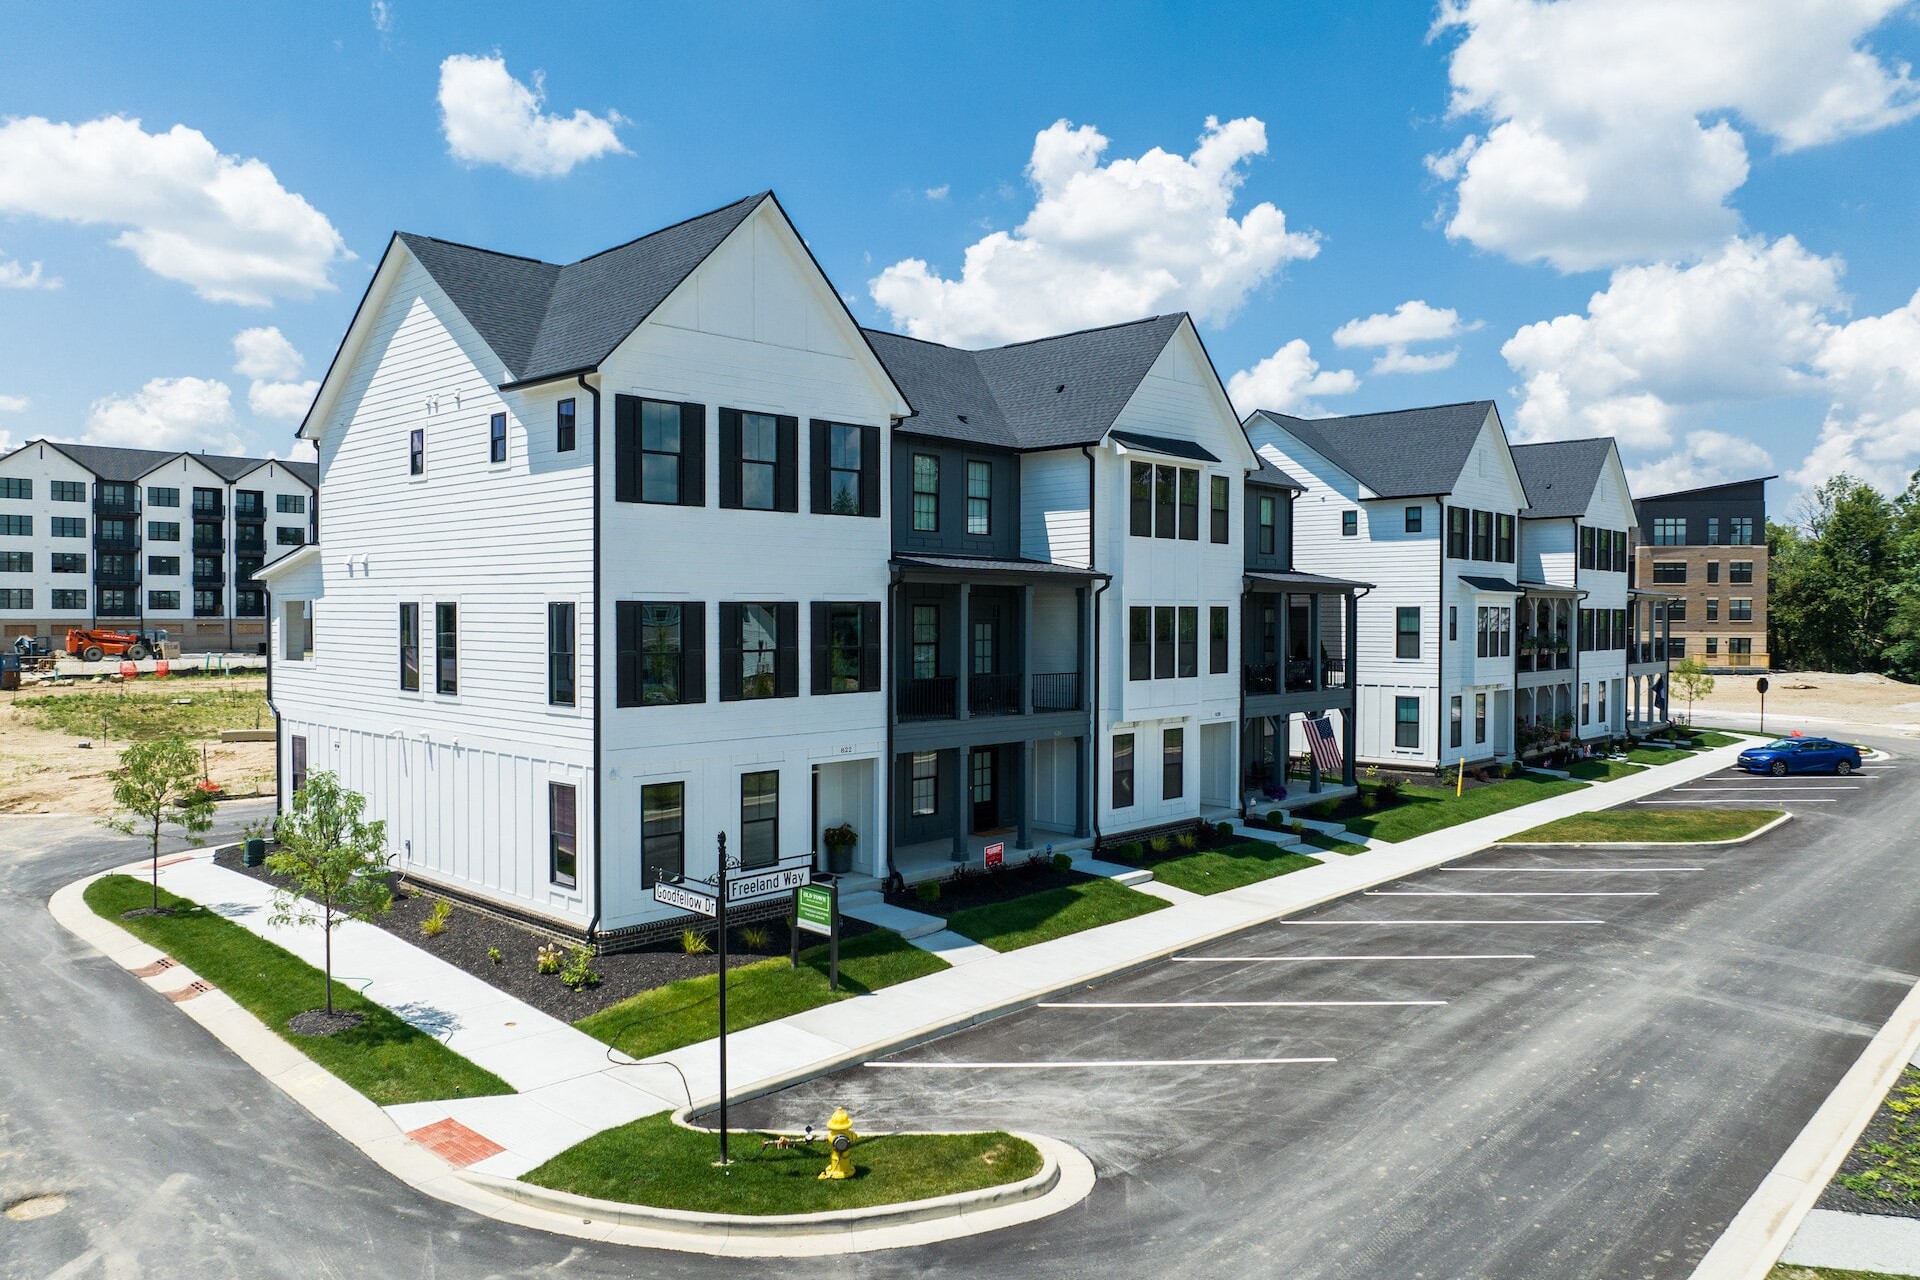 An aerial view of a row of apartment buildings in Carmel, Indiana.